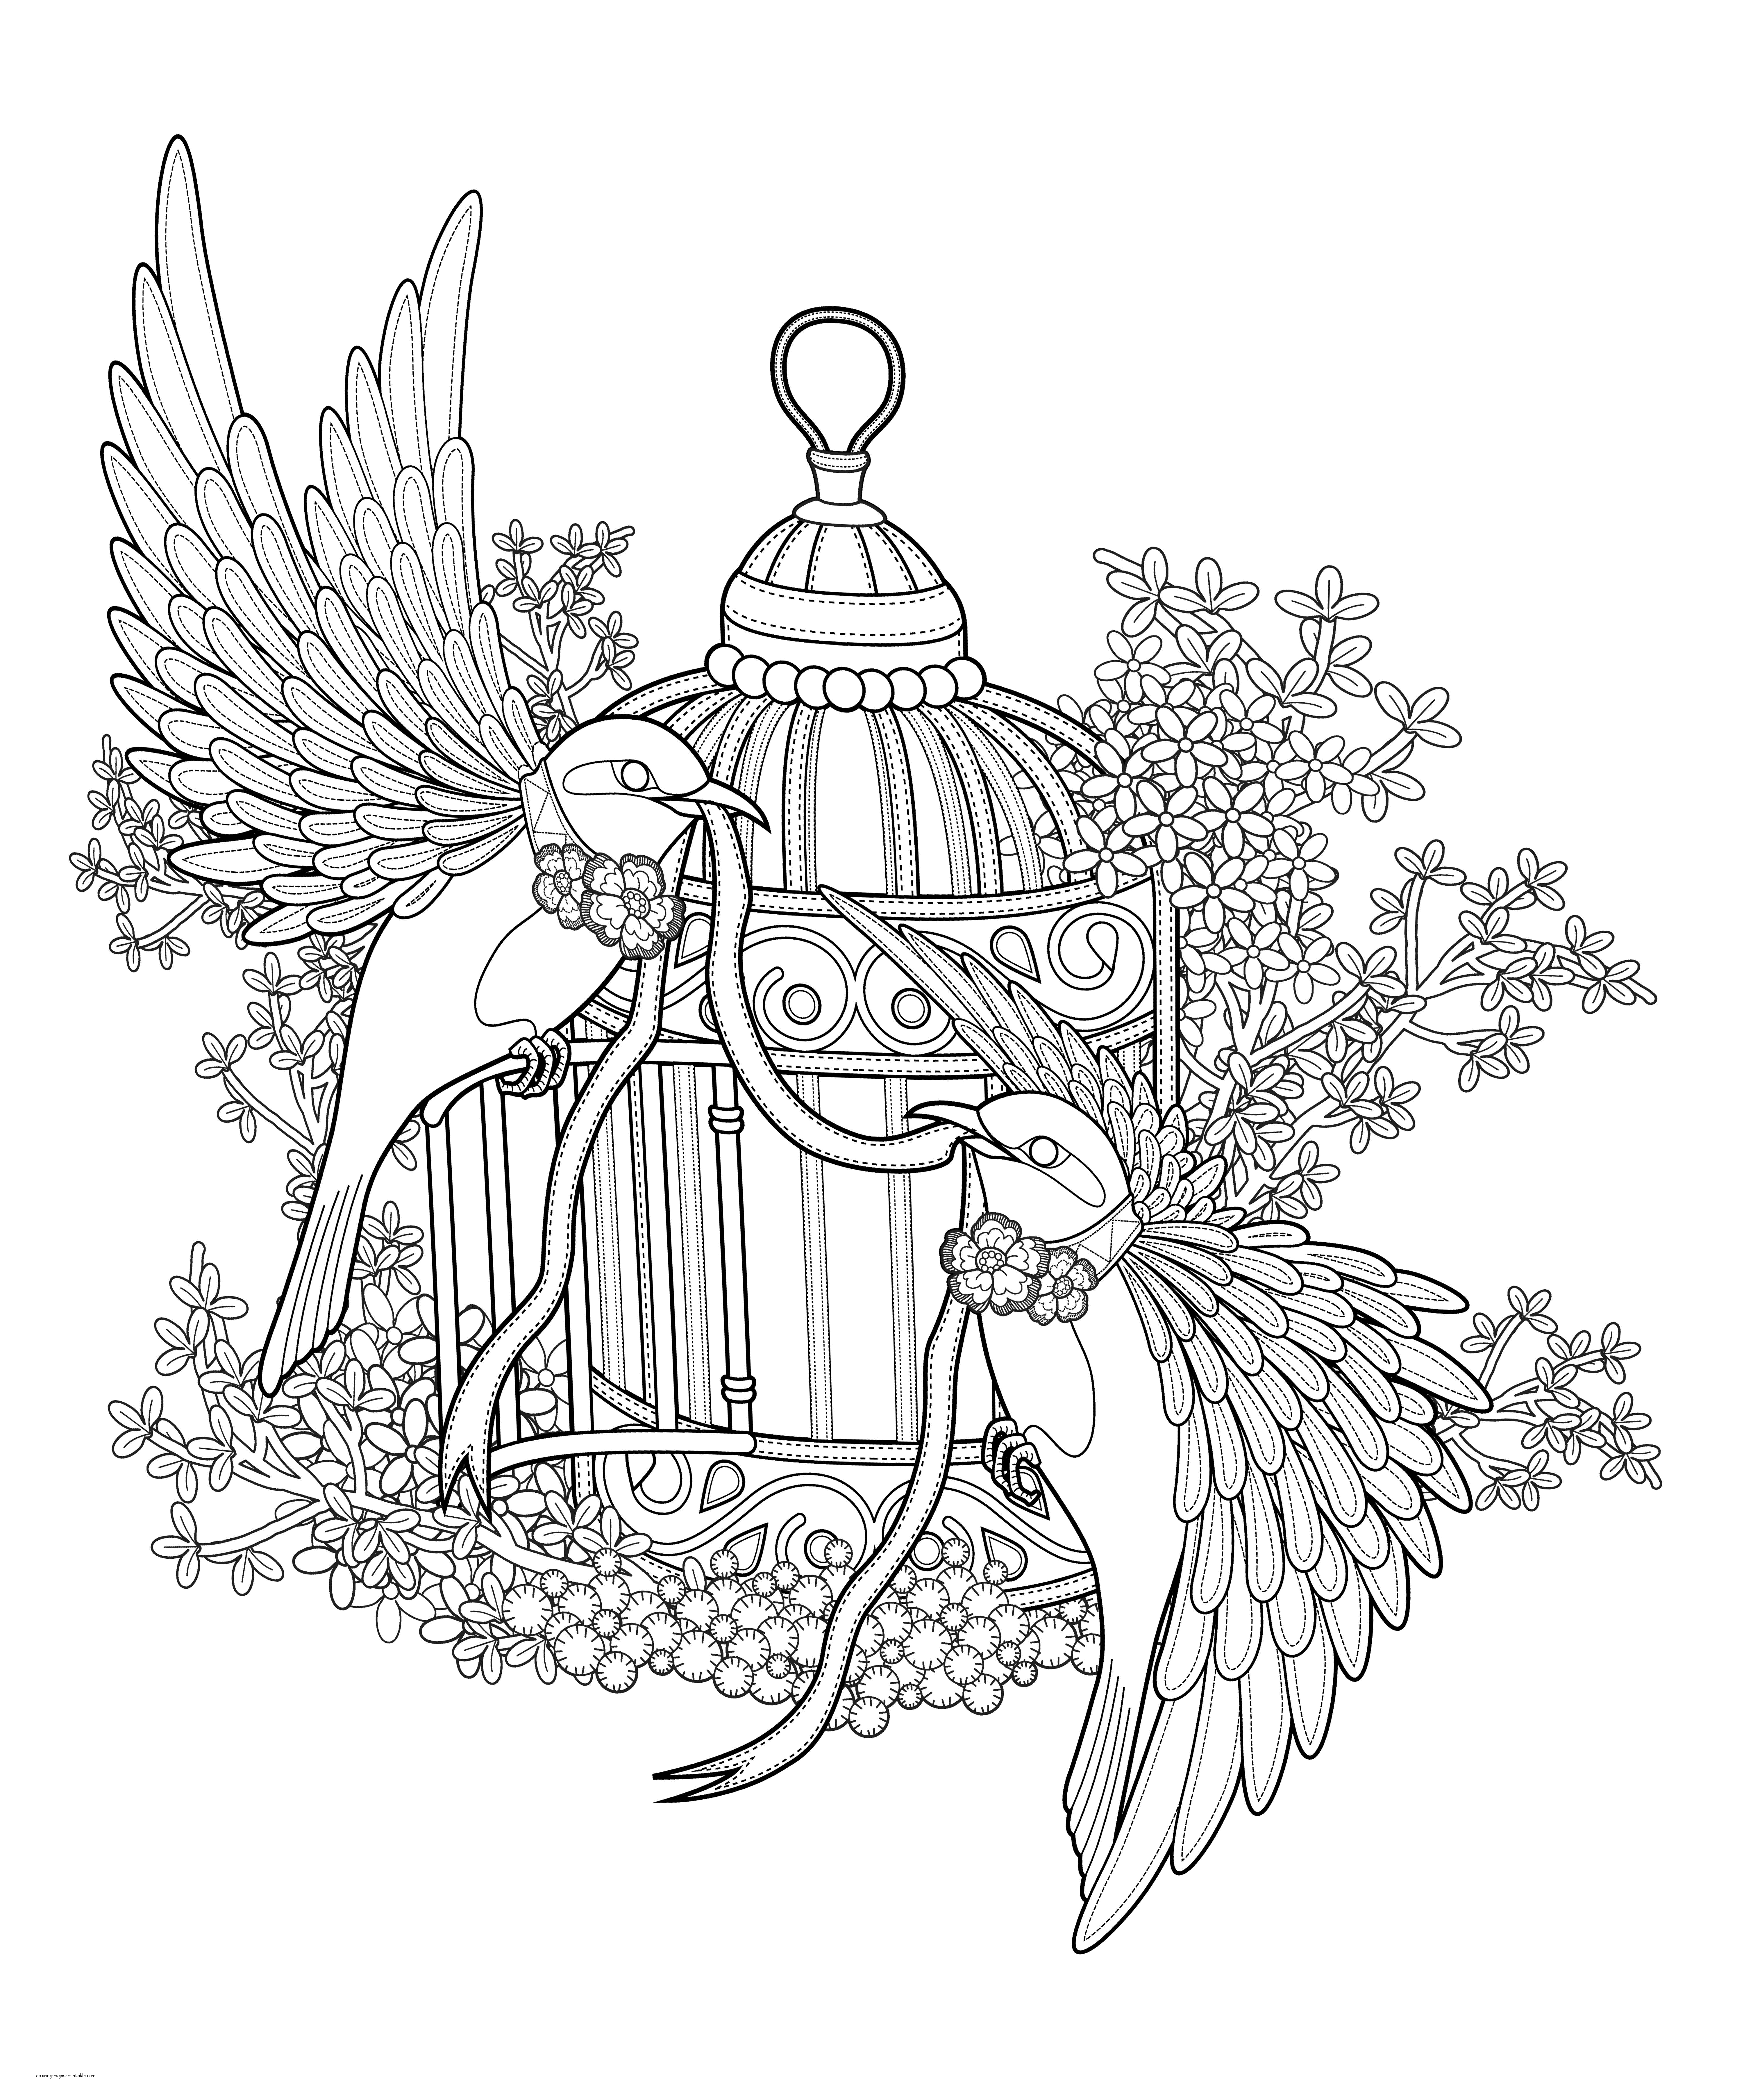 Songbirds Coloring Page    COLORING PAGES PRINTABLE.COM